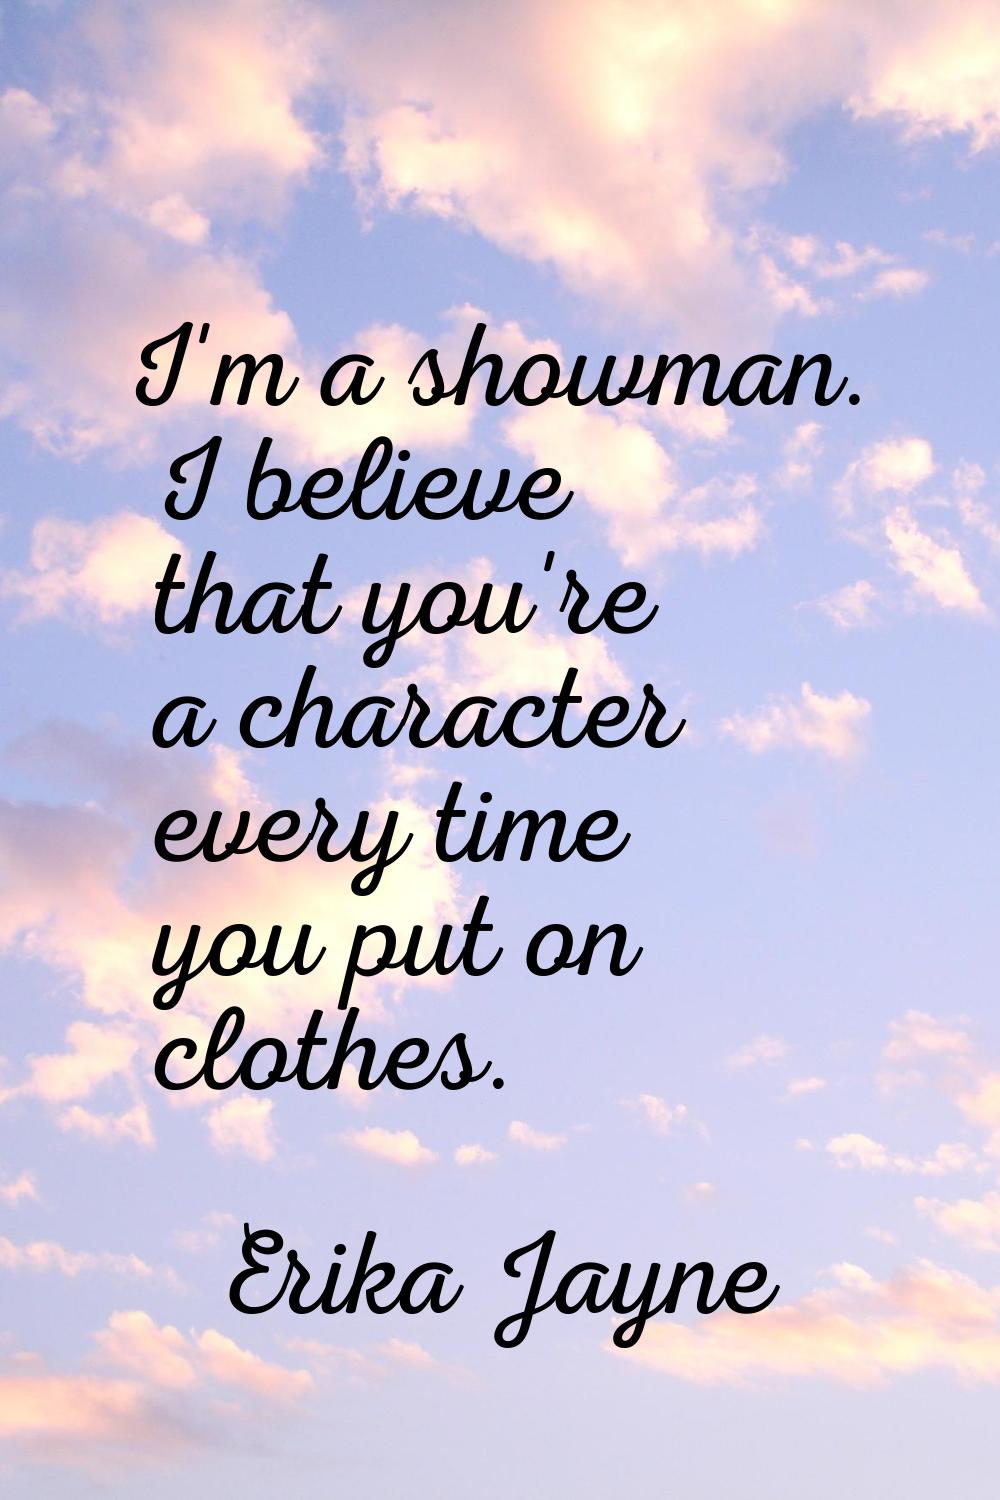 I'm a showman. I believe that you're a character every time you put on clothes.